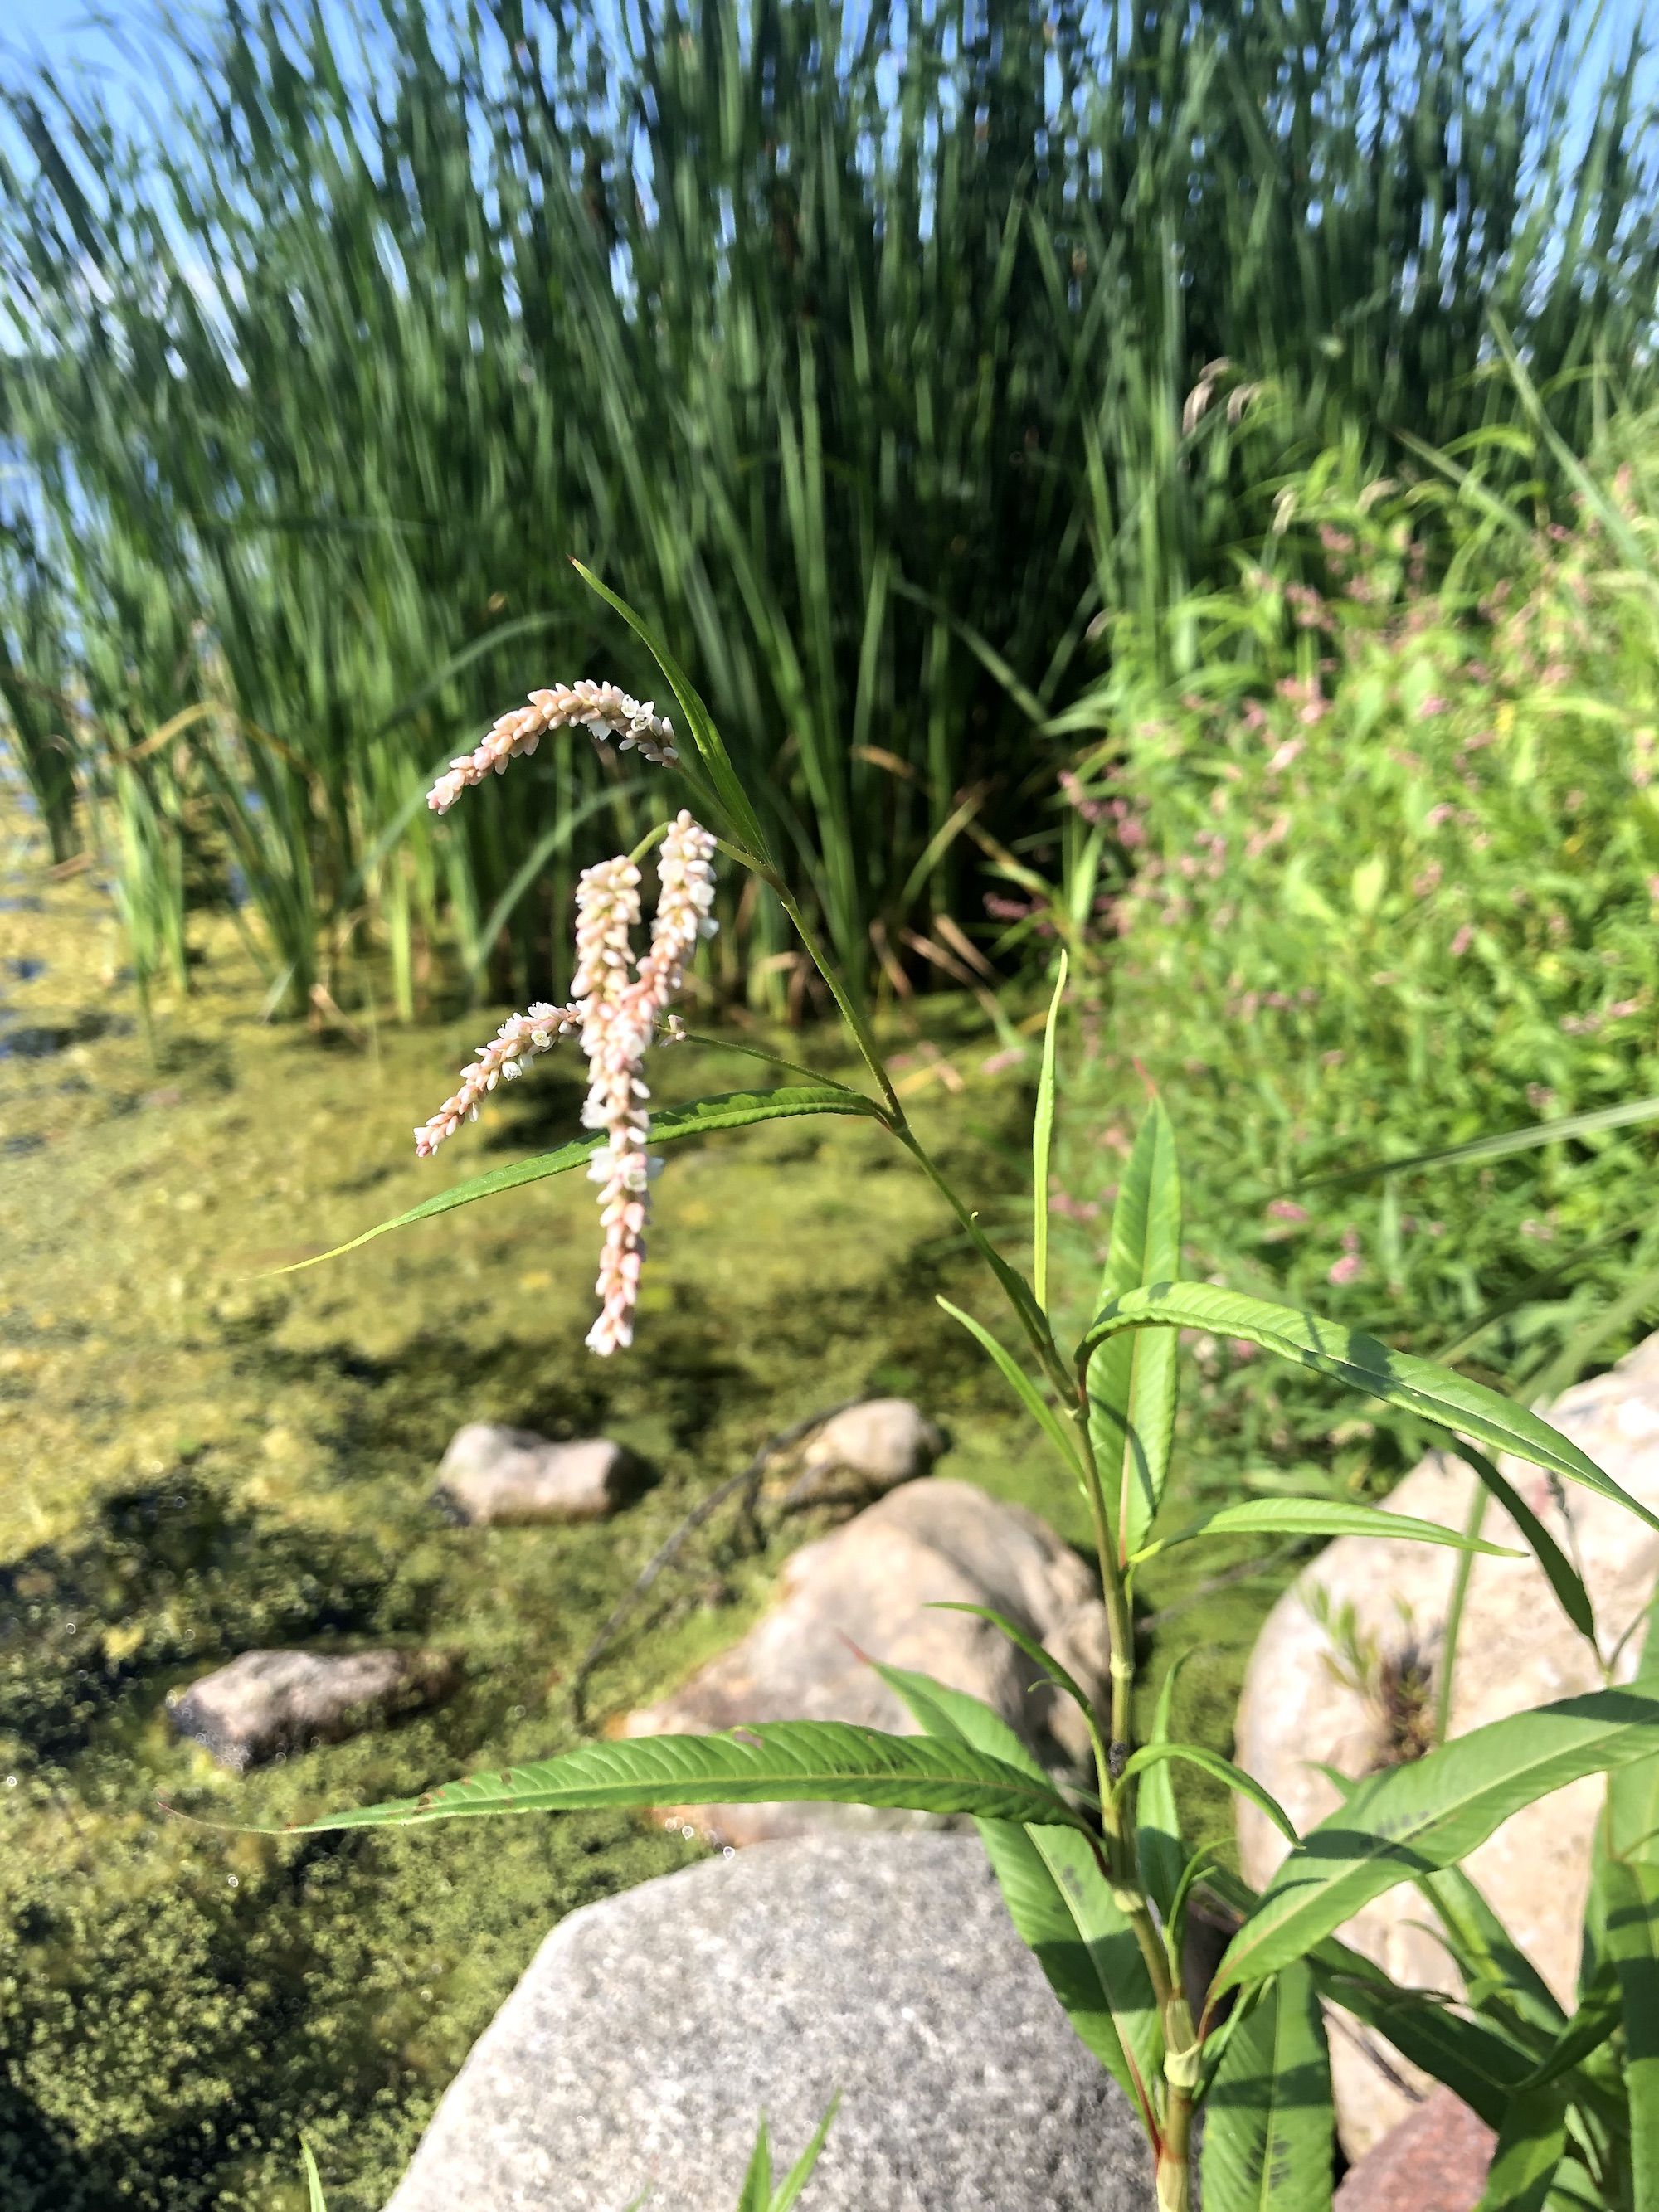 Nodding Smartweed on the shore of Lake Wingra in Wingra Park in Madison, Wisconsin on July 31, 2022.